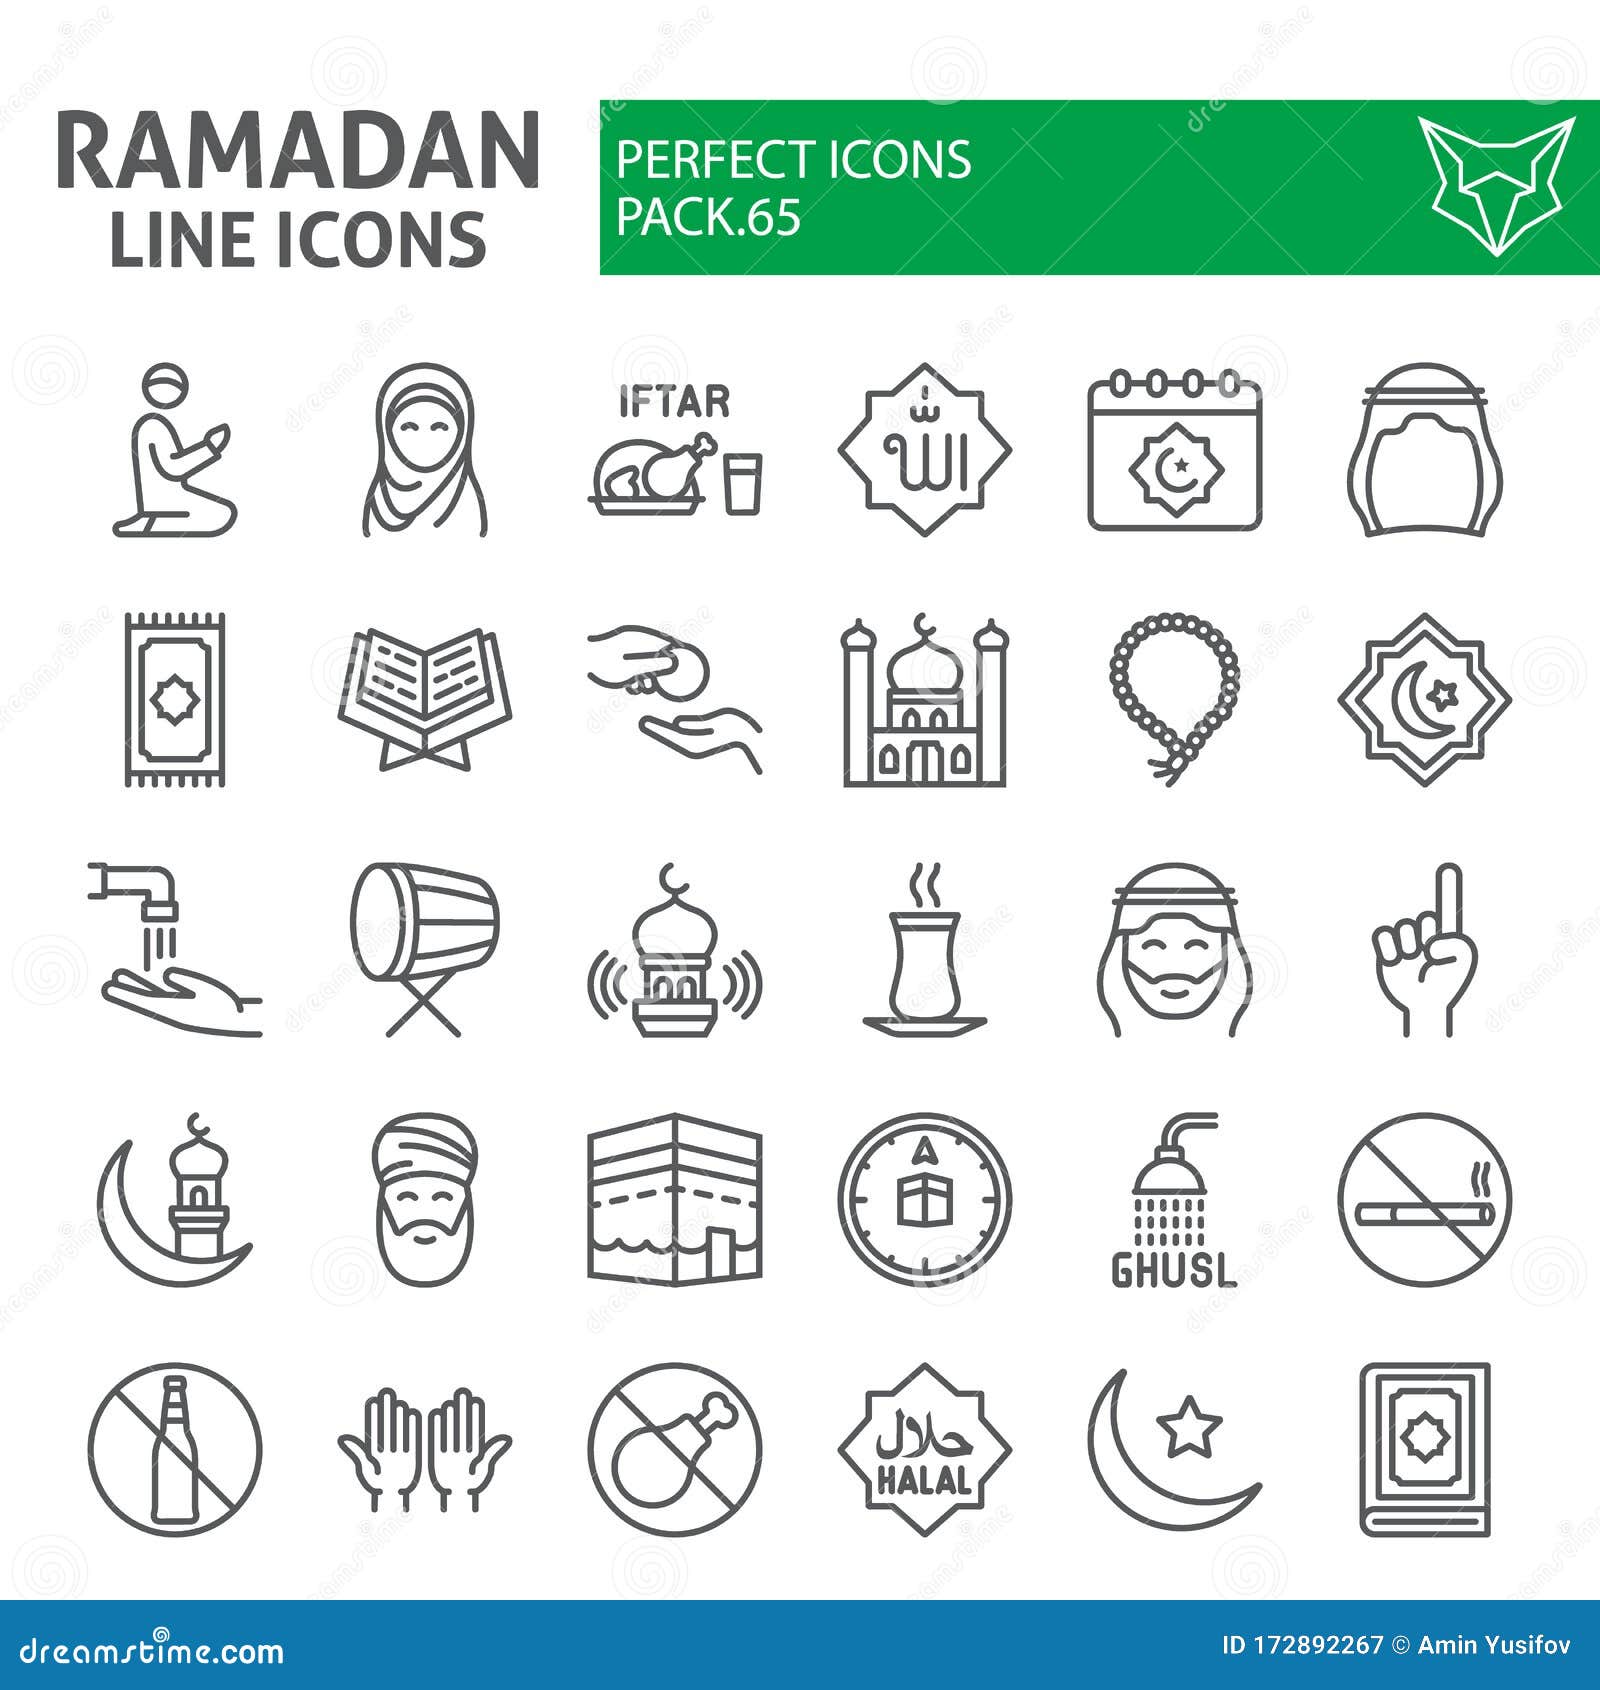 ramadan line icon set, islamic holiday s collection,  sketches, logo s, islam icons, muslim day